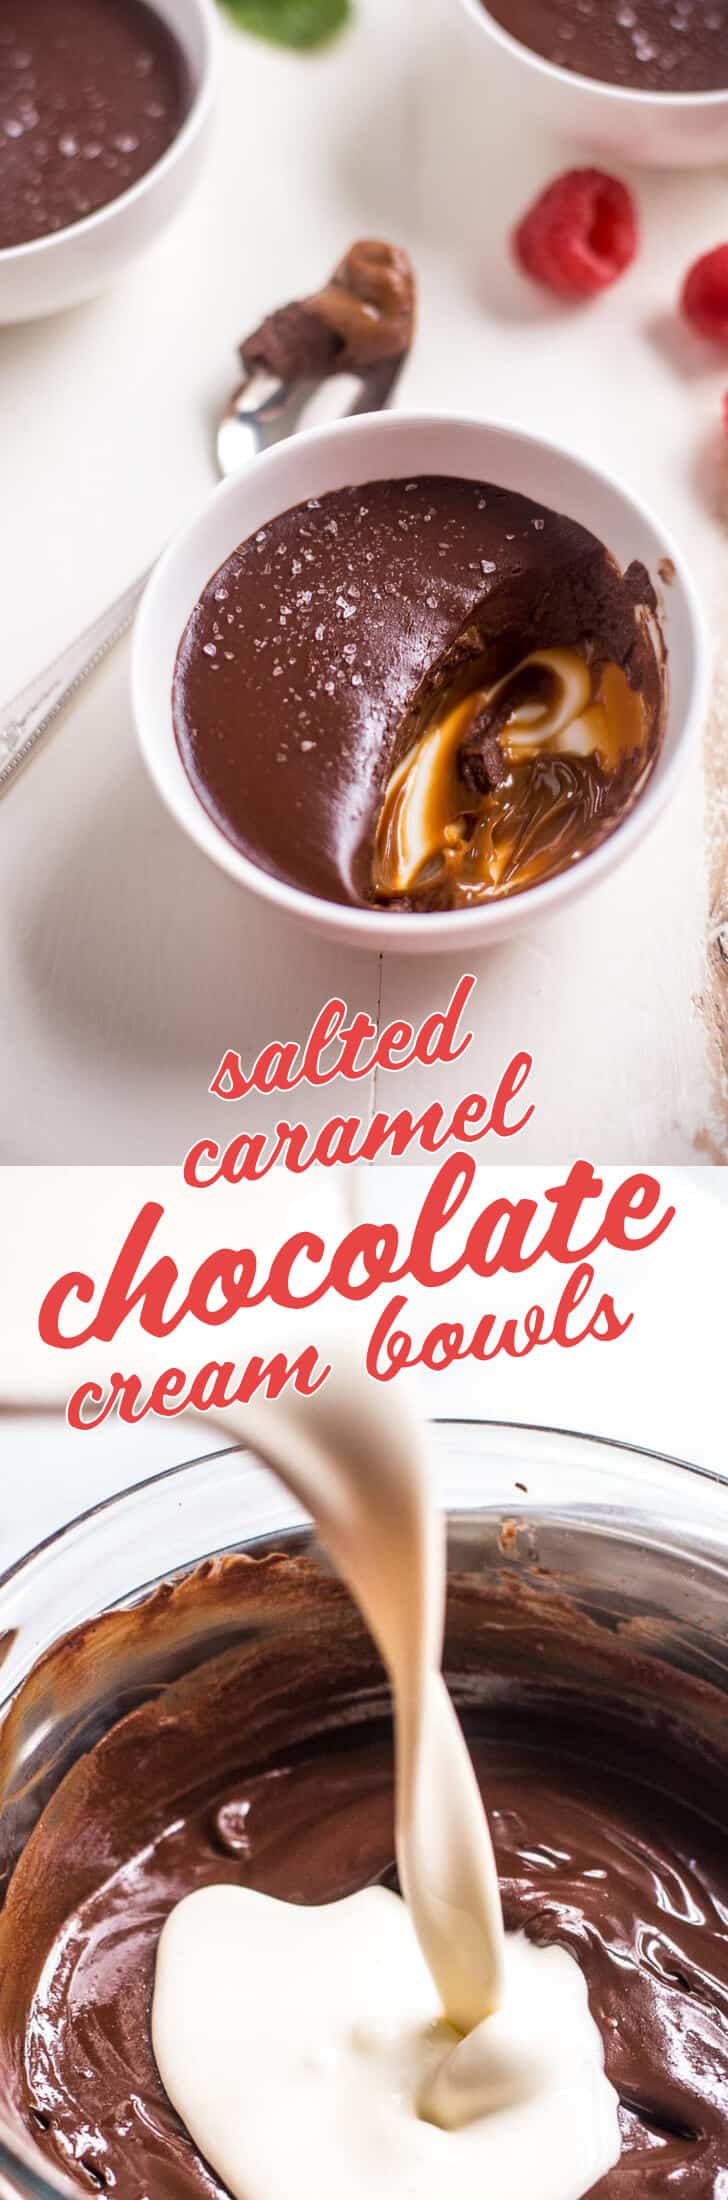 Salted caramel chocolate cream bowls - No Bake Dessert! With just five ingredients and easily made ahead, these rich, creamy, chocolate bowls with a layer of salted caramel in the bottom are a favorite to serve for guests or just have tucked in the fridge for a weeknight treat.